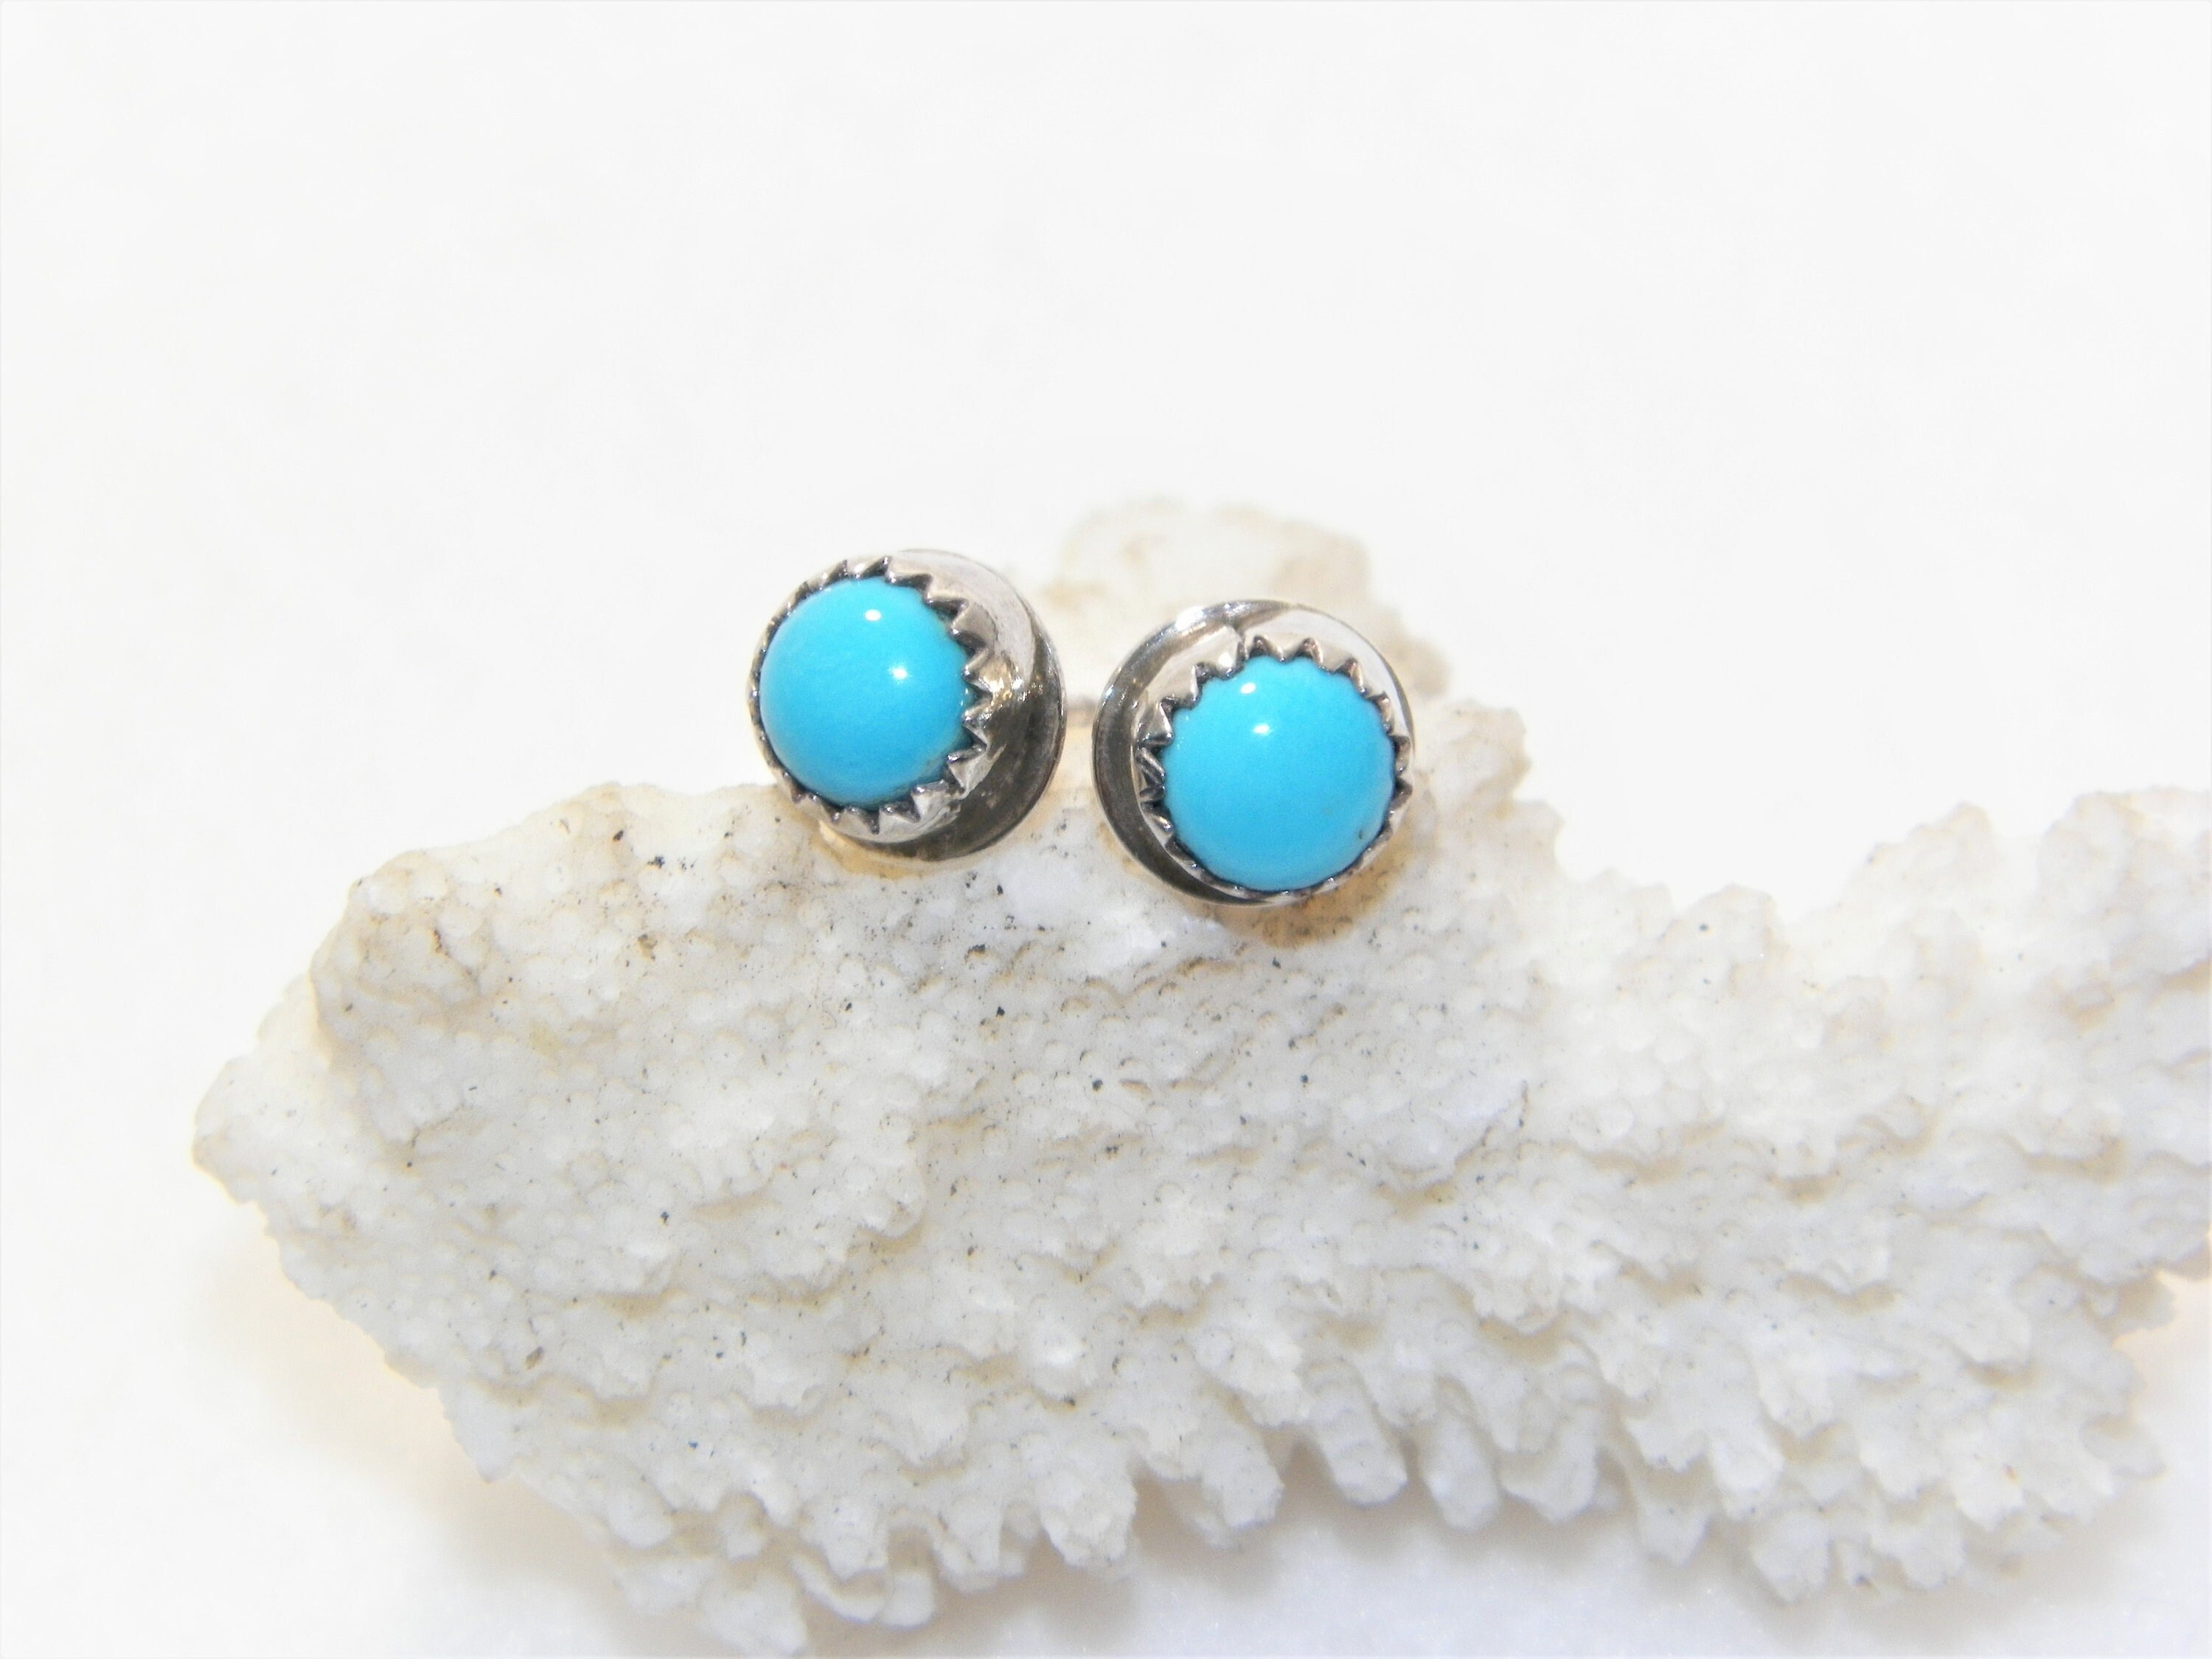 Turquoise Solid 925 Sterling Silver Stud Earrings 